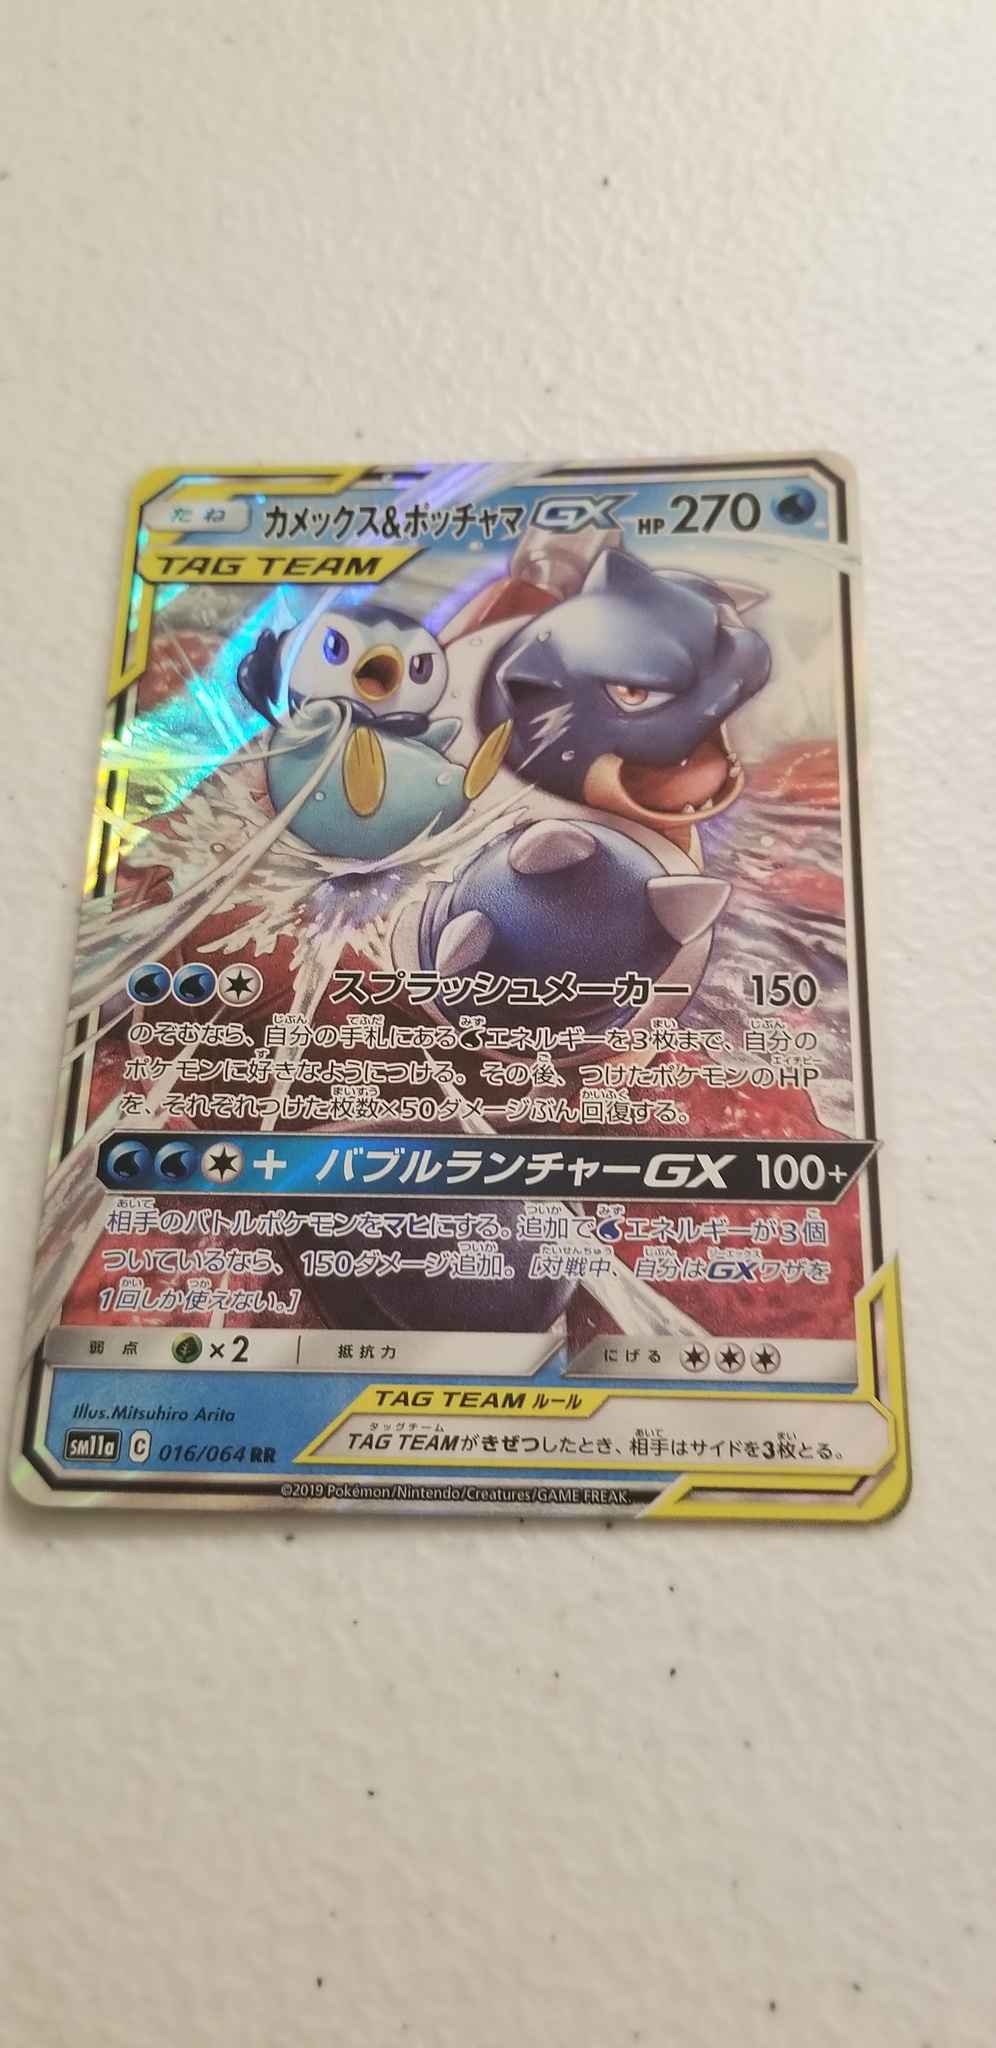 Blastoise Piplup Gx Blastoise Piplup Gx Sm Cosmic Eclipse Pokemon Online Gaming Store For Cards Miniatures Singles Packs Booster Boxes